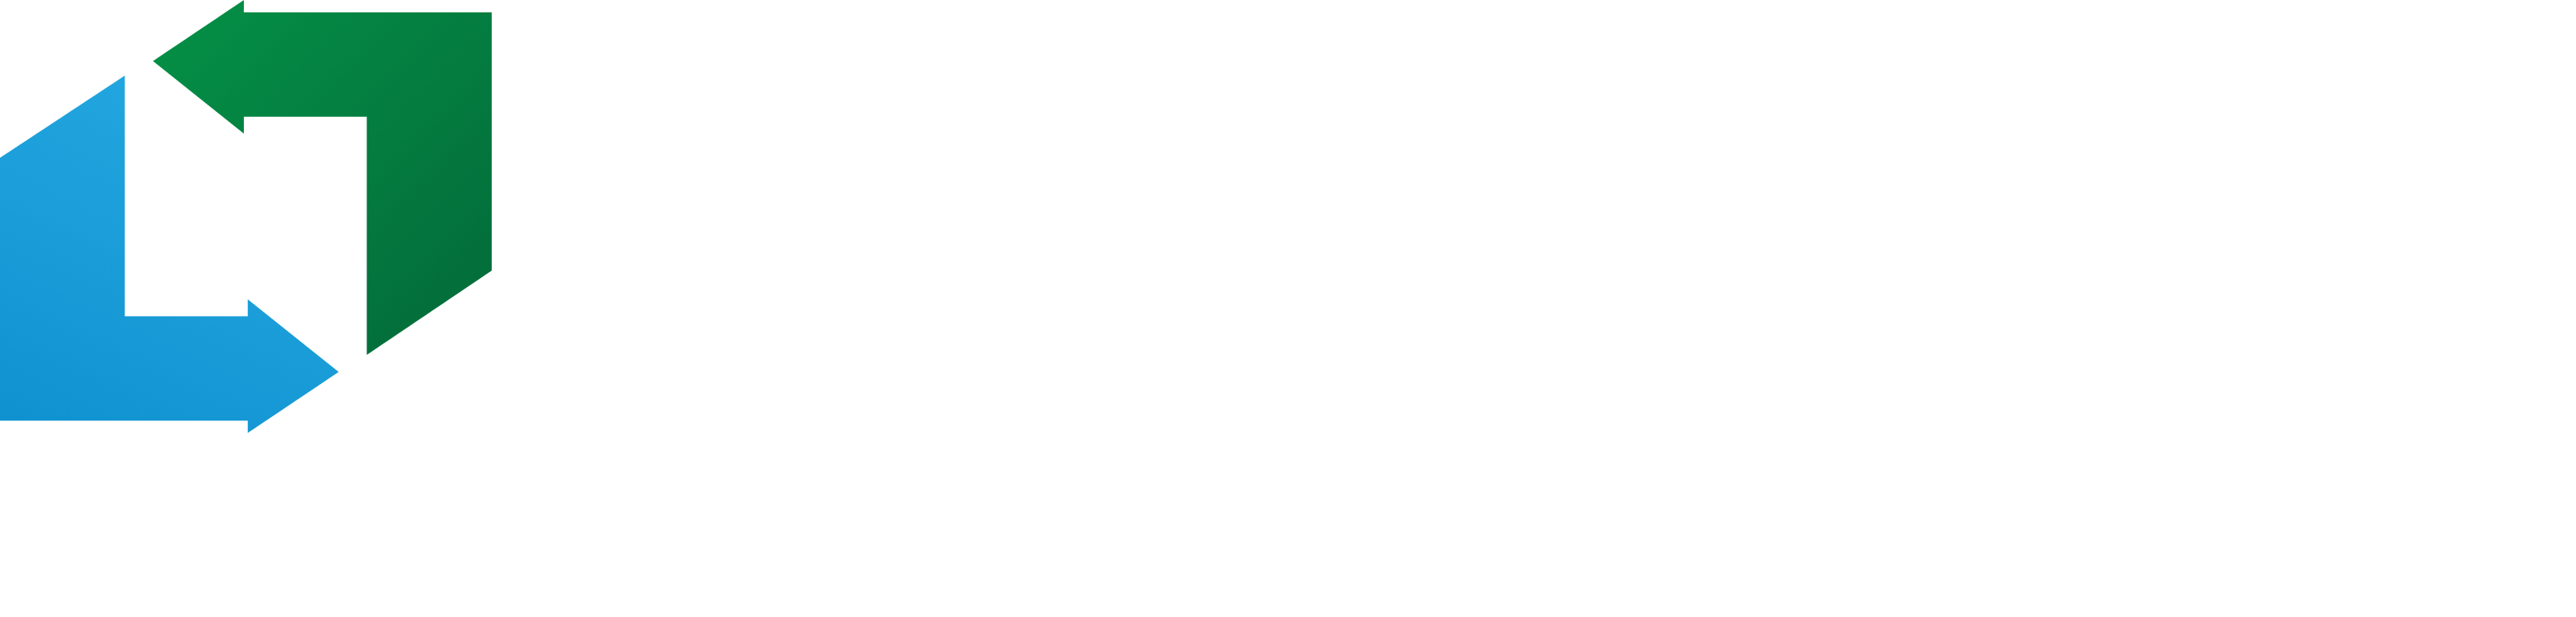 LiquiLoans (NDX P2P Private Limited) Logo